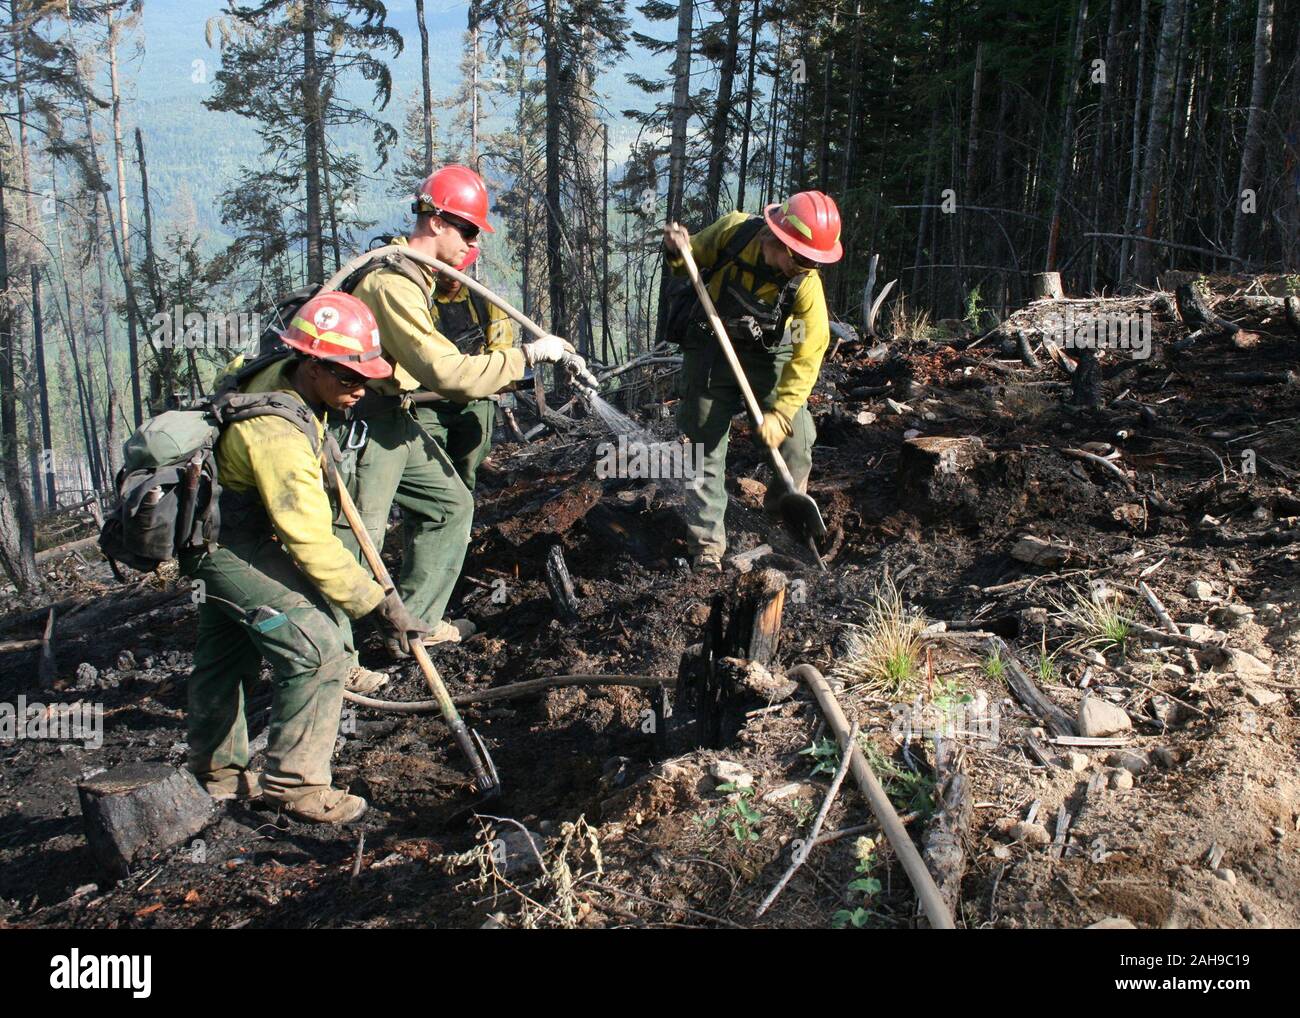 98 firefighters with support from three fire engines, two helicopters, two water tenders, a dozer and an air tanker battled to contain the 90 acre Rogers Fire located on Mt. Rogers five miles west of Aladdin, WA on the Coleville National Forest. Firefighters worked under adverse conditions with steep terrain, heavy timber and gusting winds to reduce the loss of timber and protect the Rogers Mountain Trail. The Rogers Fire began on Aug. 9, 2011 and was controlled by Aug. 19, 2011 with mop up crews ensuring that no flare-ups occurRED.  Colville National Forest has 1.1 million acres in northeaste Stock Photo